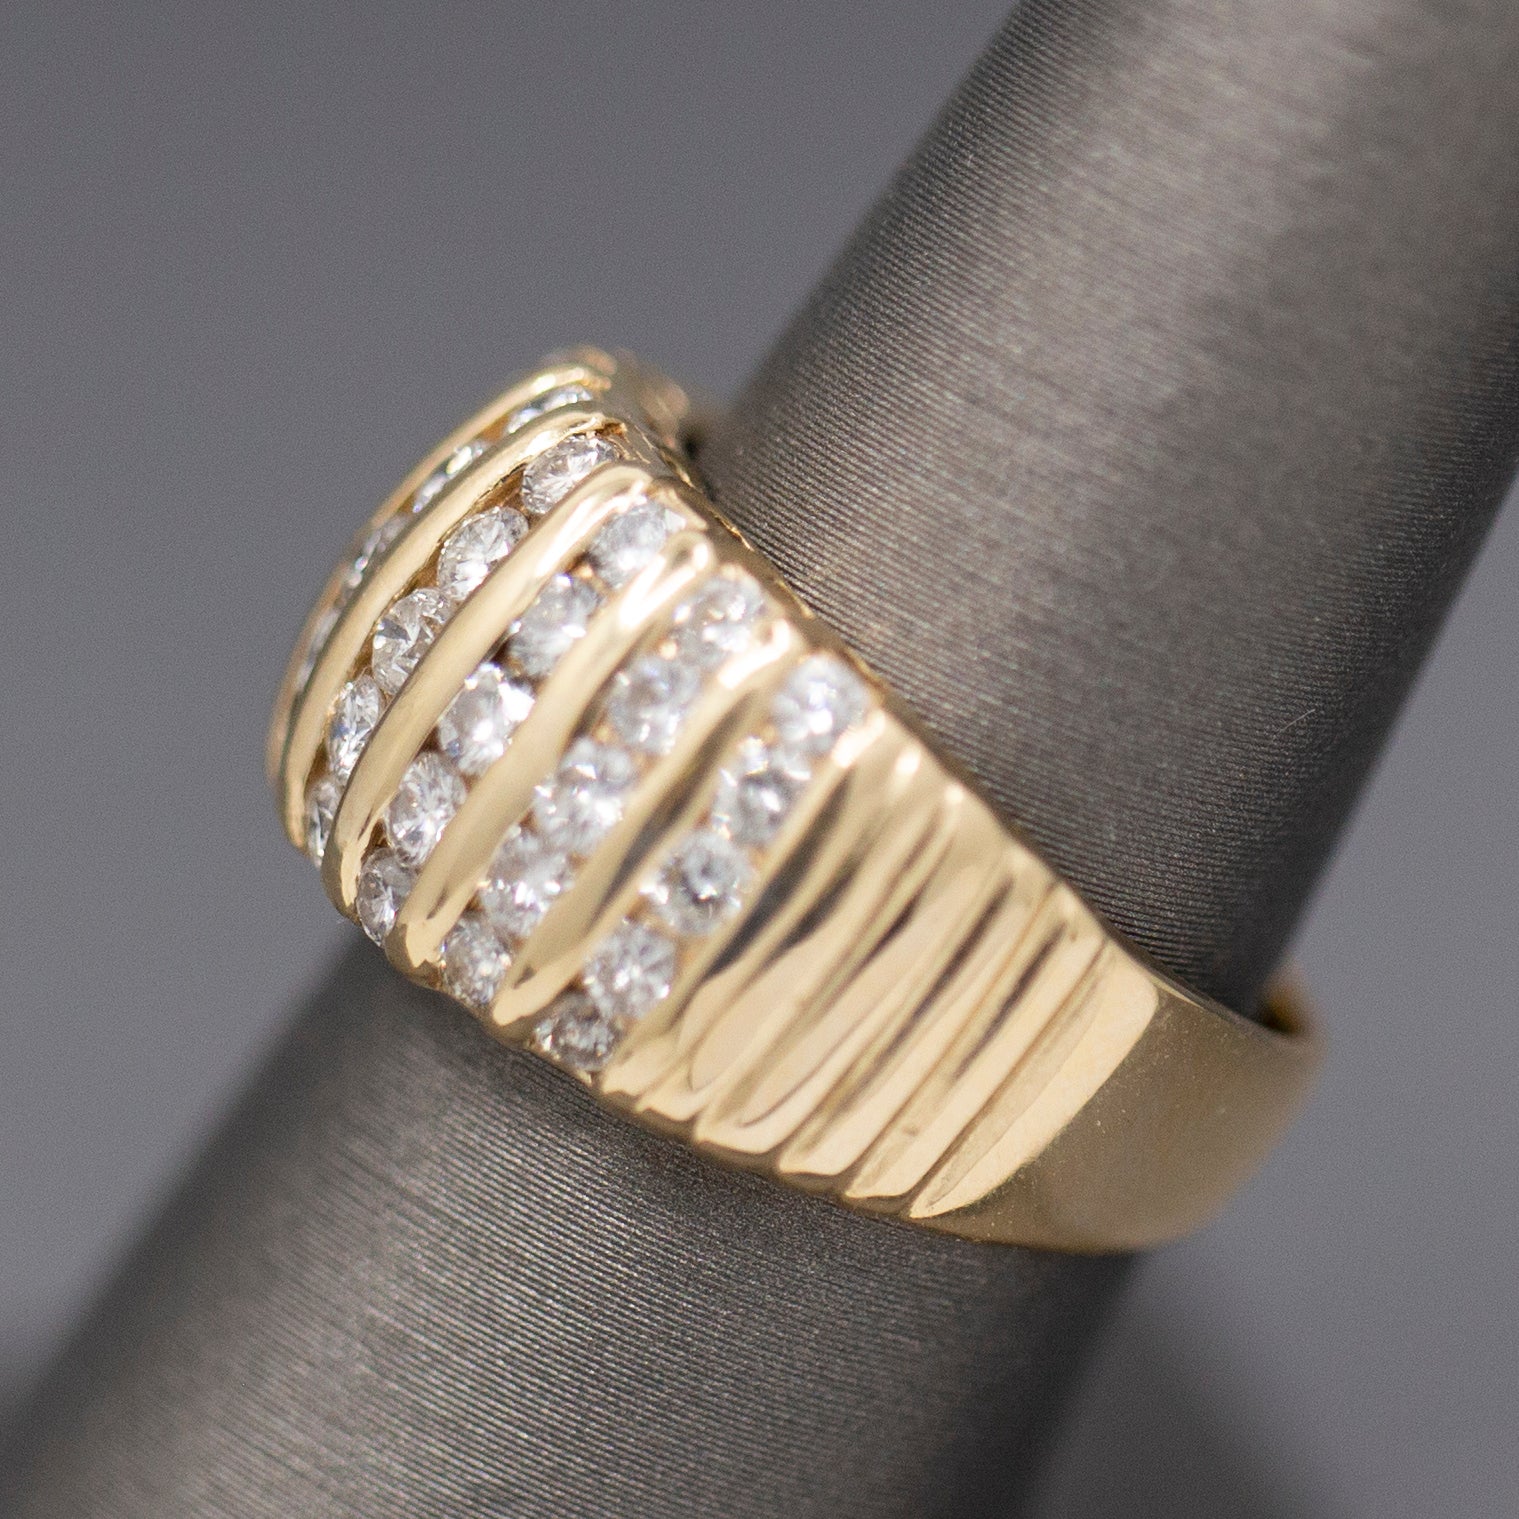 Domed Channel Set Diamond Wide Band Ring in 14k Yellow Gold